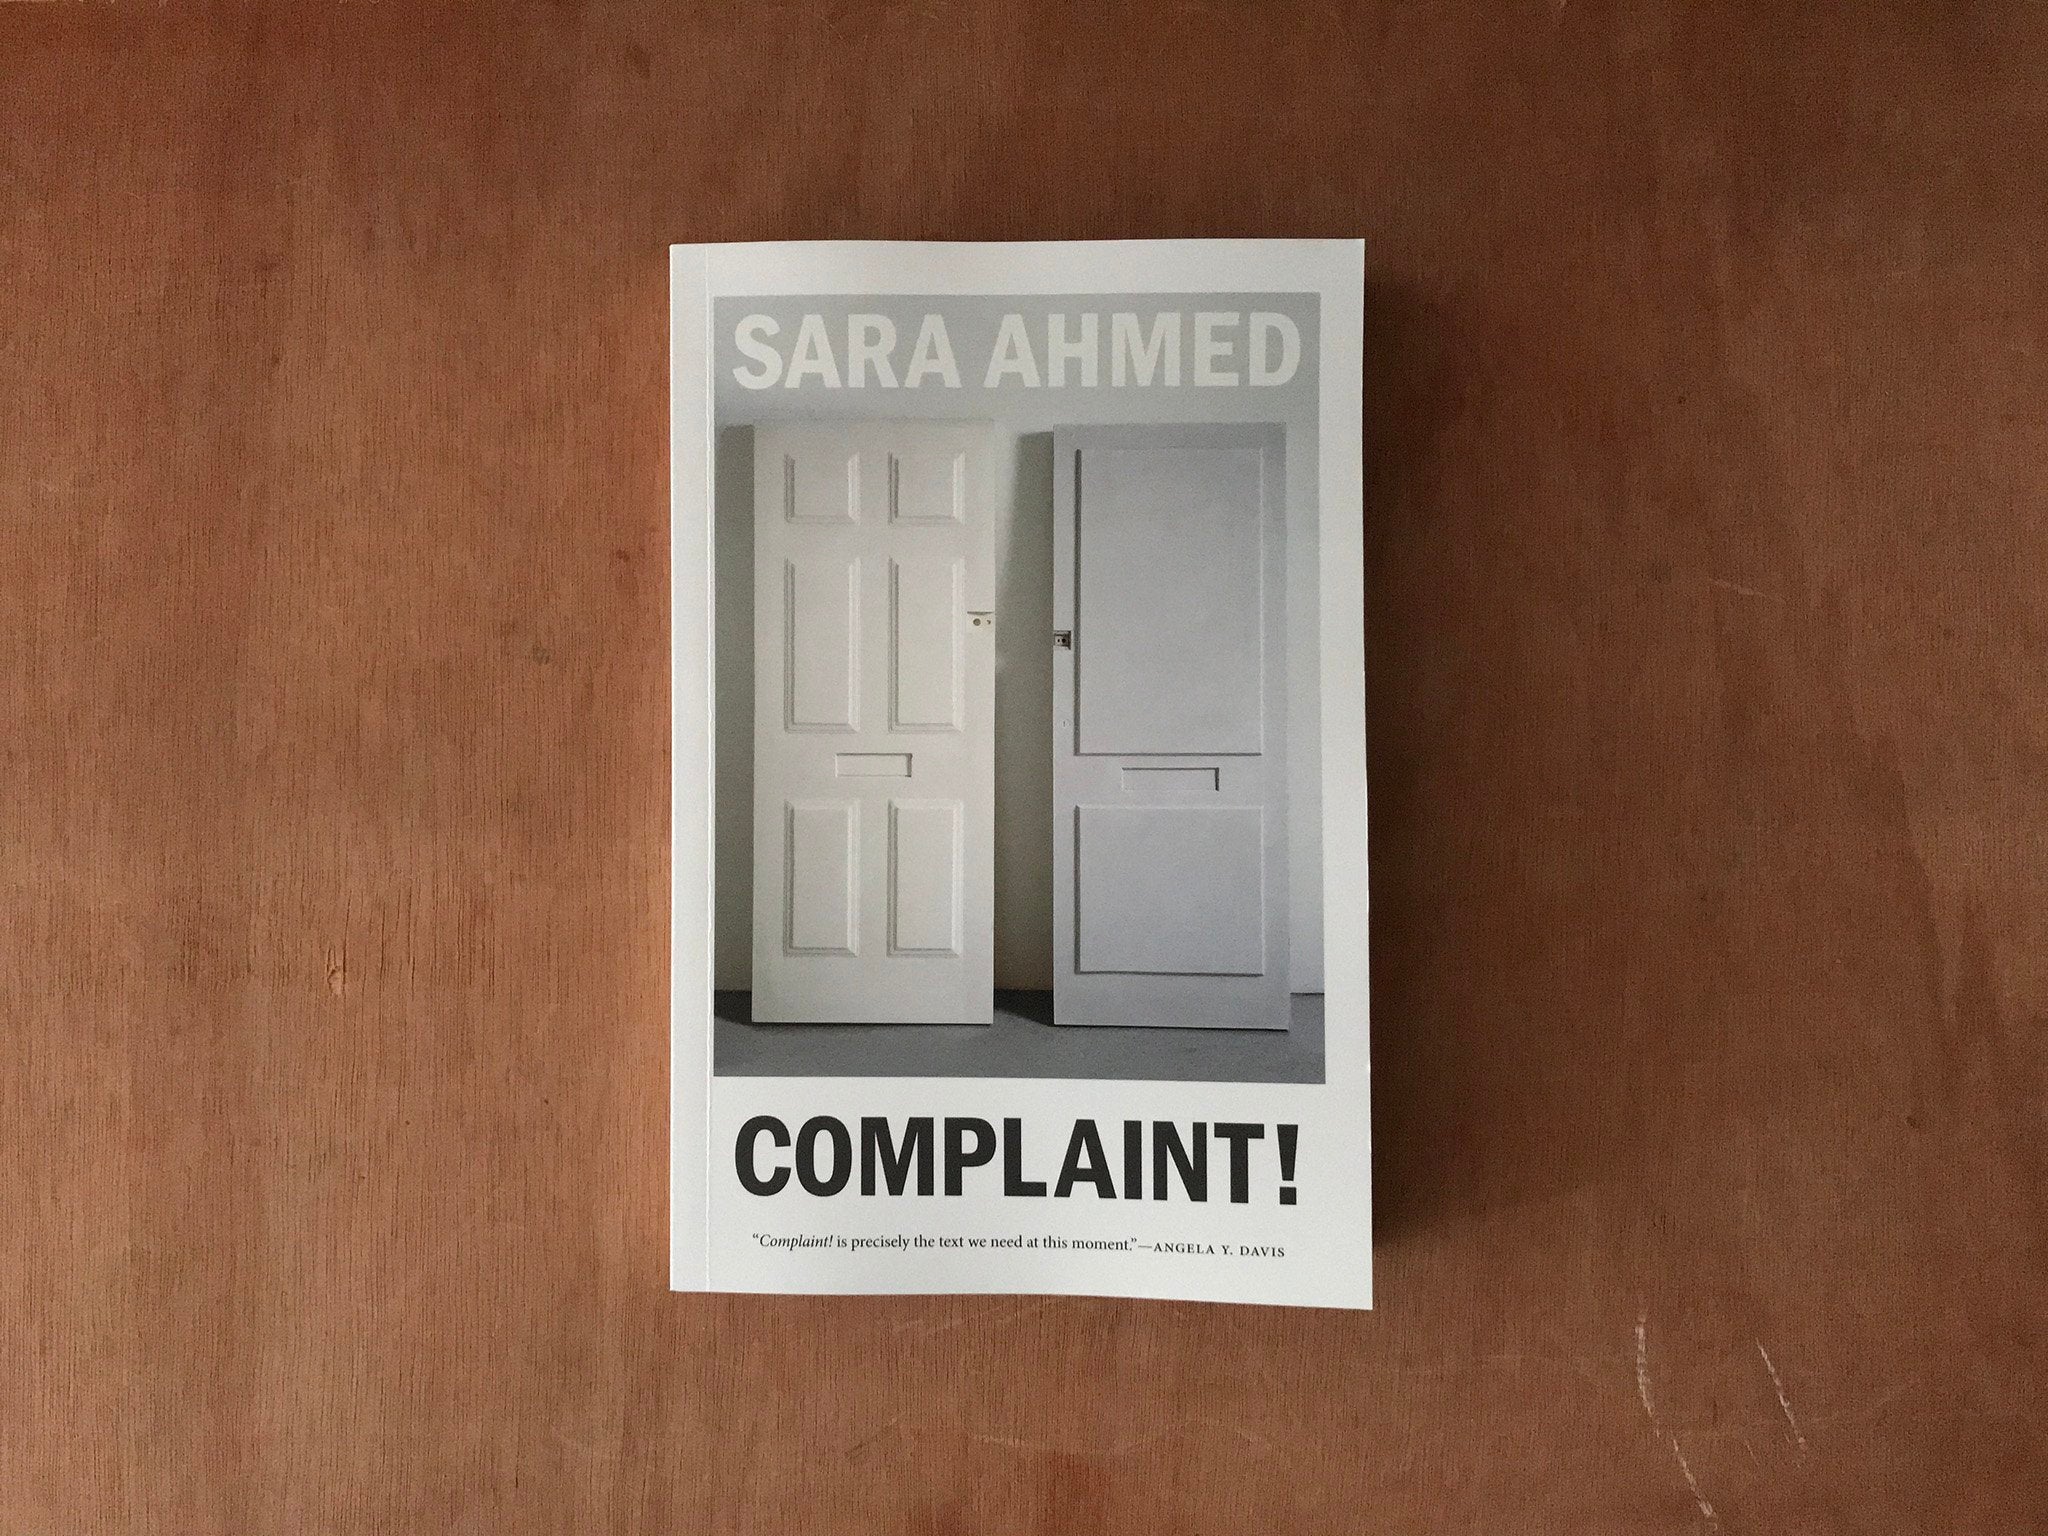 COMPLAINT! by Sara Ahmed